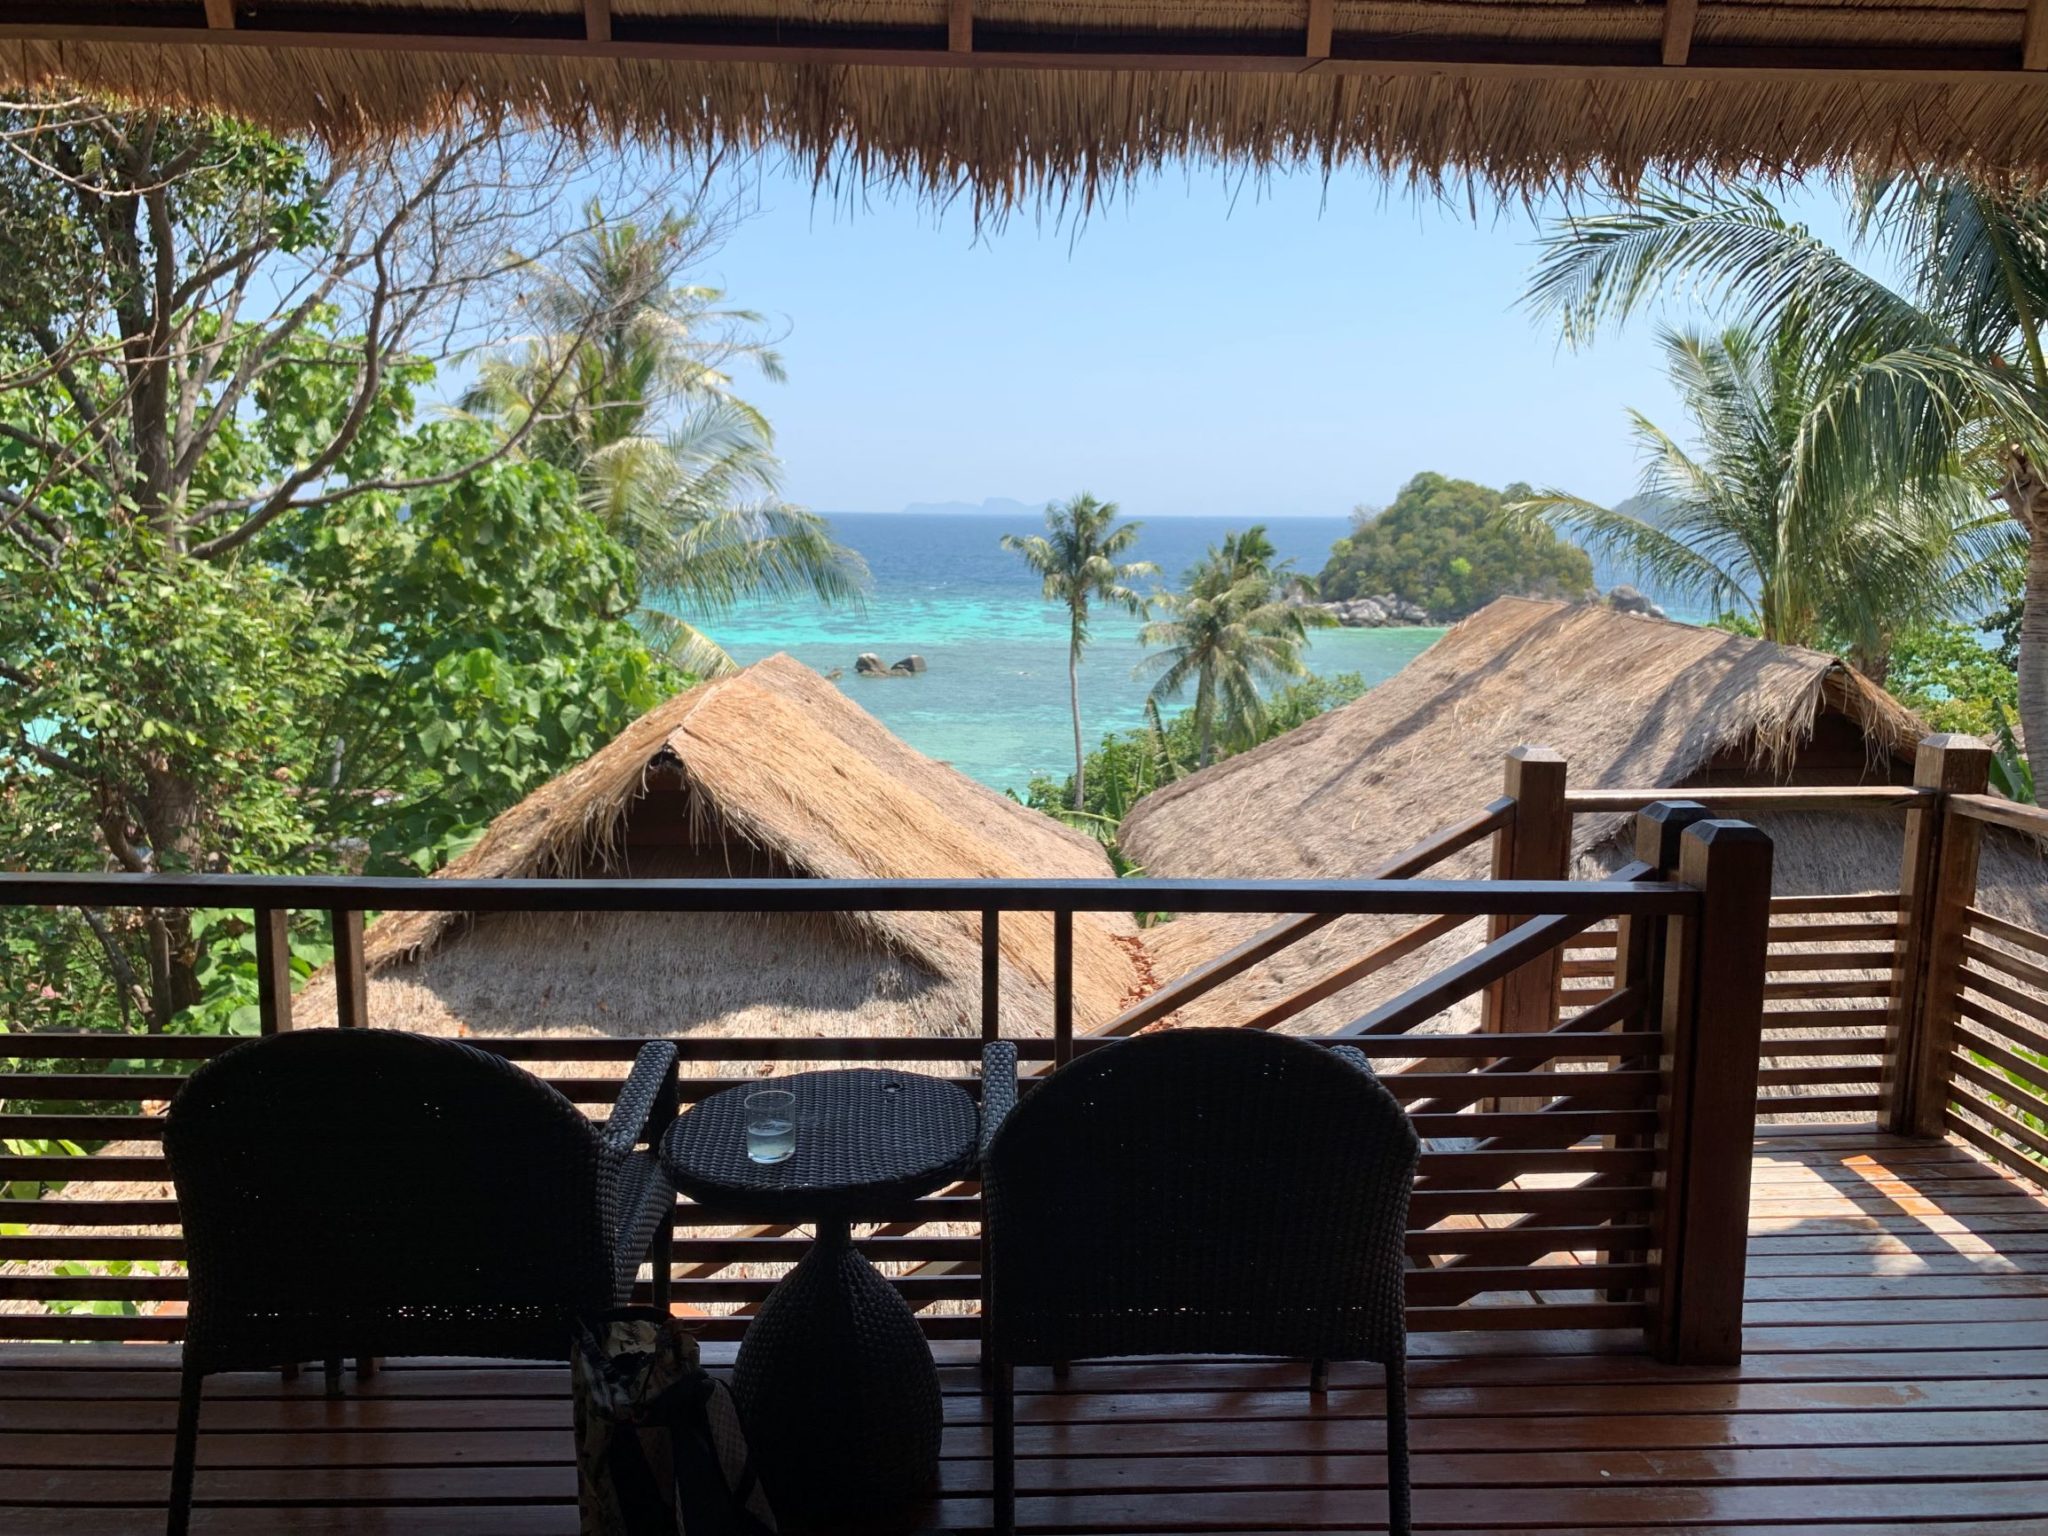 Koh Lipe – Be There Shortly